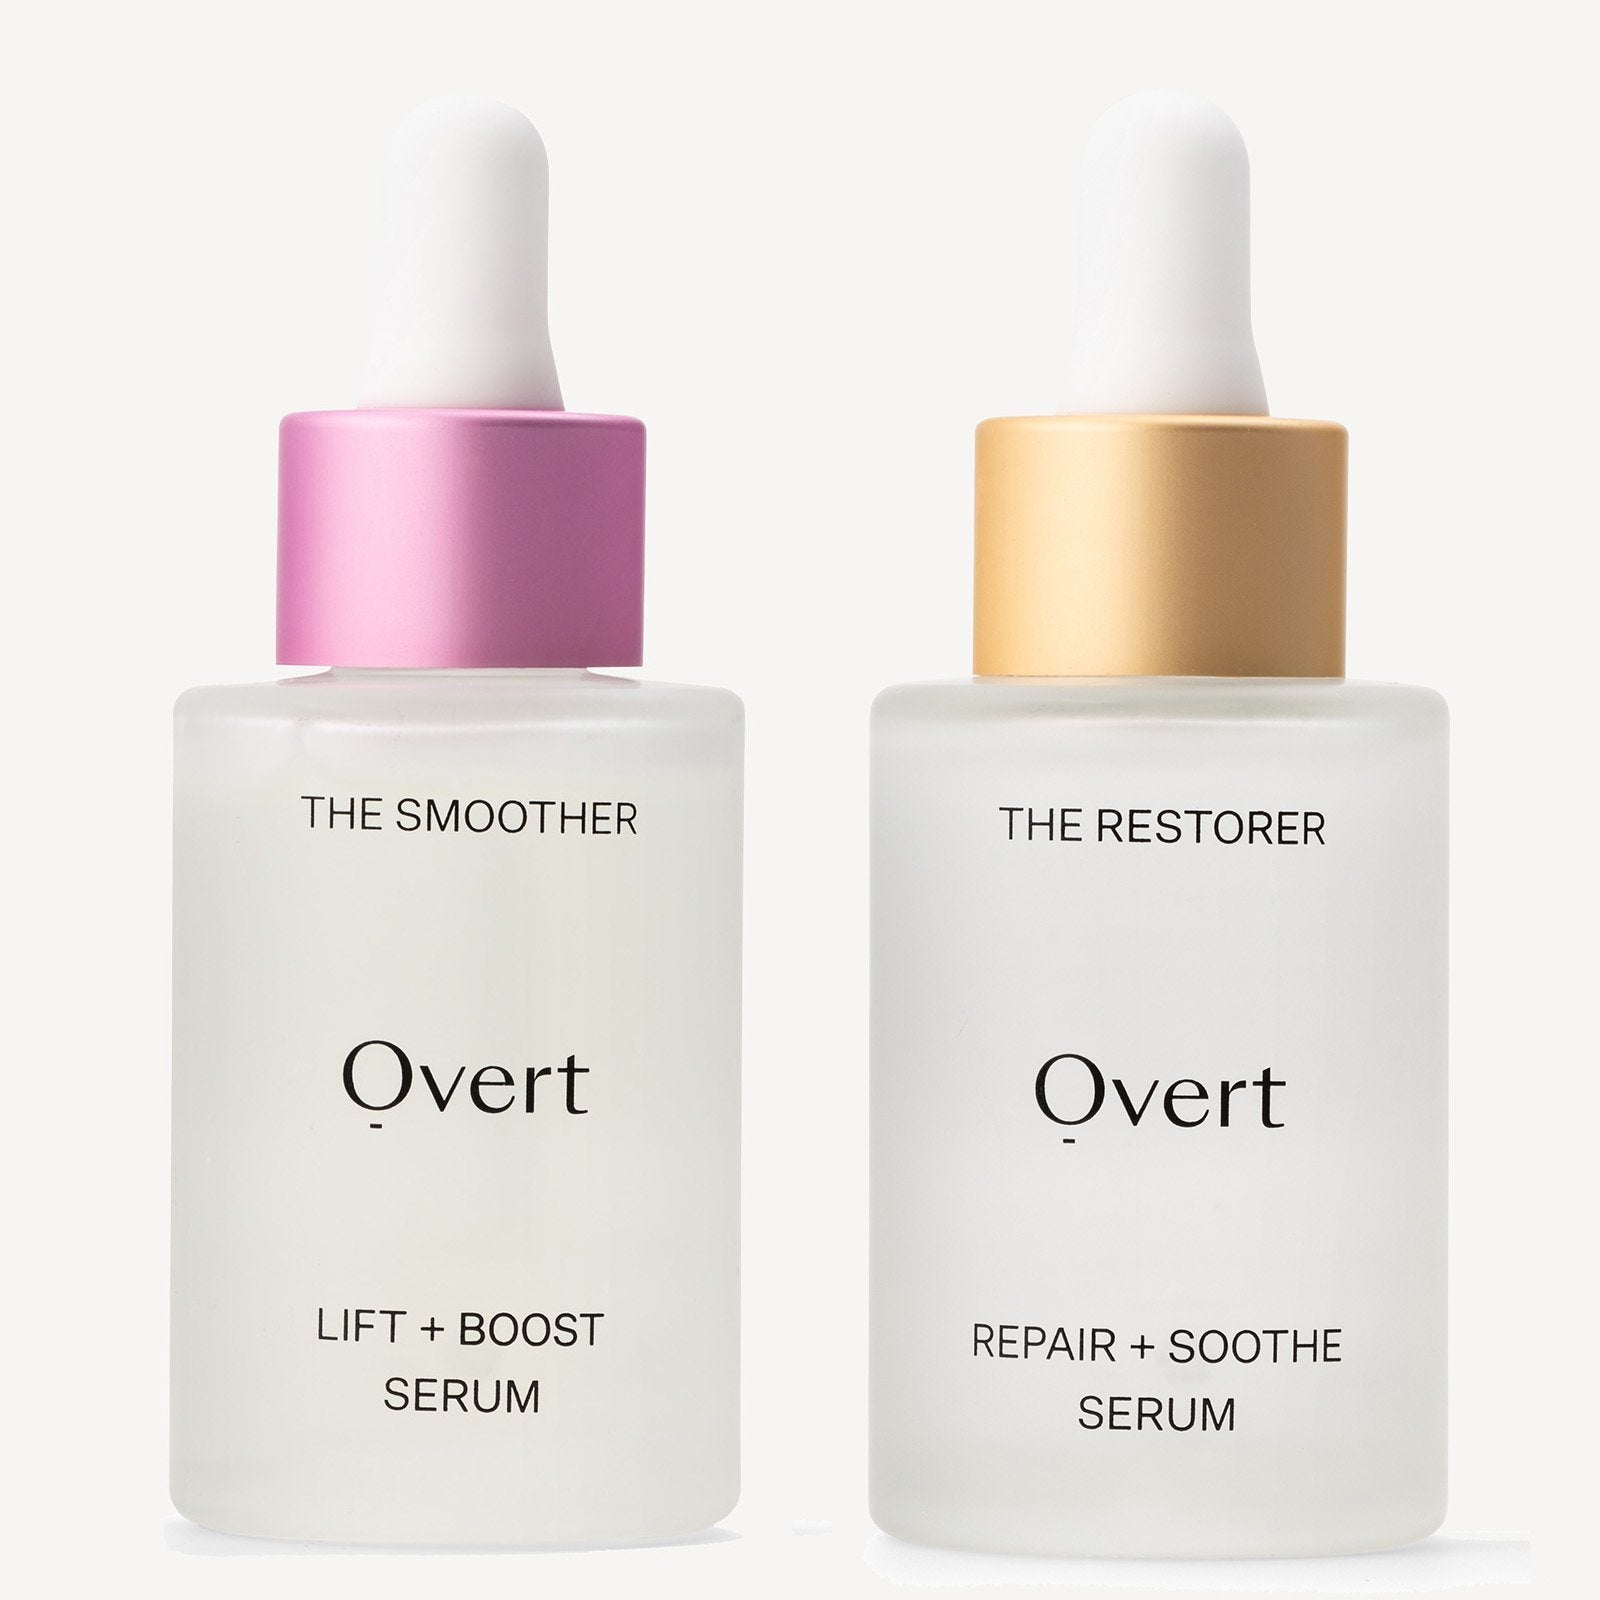 The Anti-Aging Duo by Overt